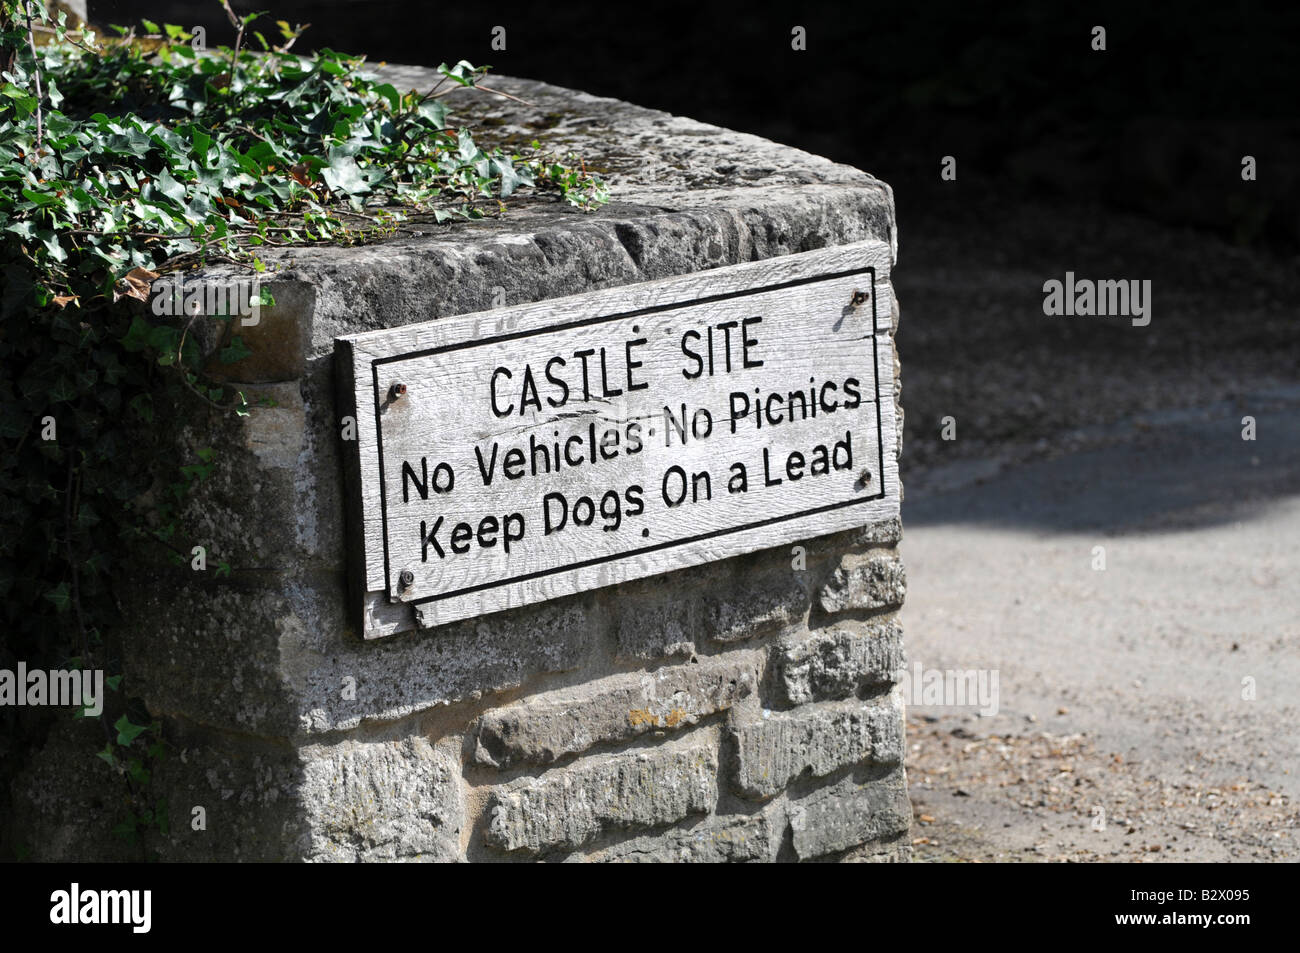 Sign to Fotheringhay Castle, saying no vehicles, no picnics and keep dogs on lead. Stock Photo